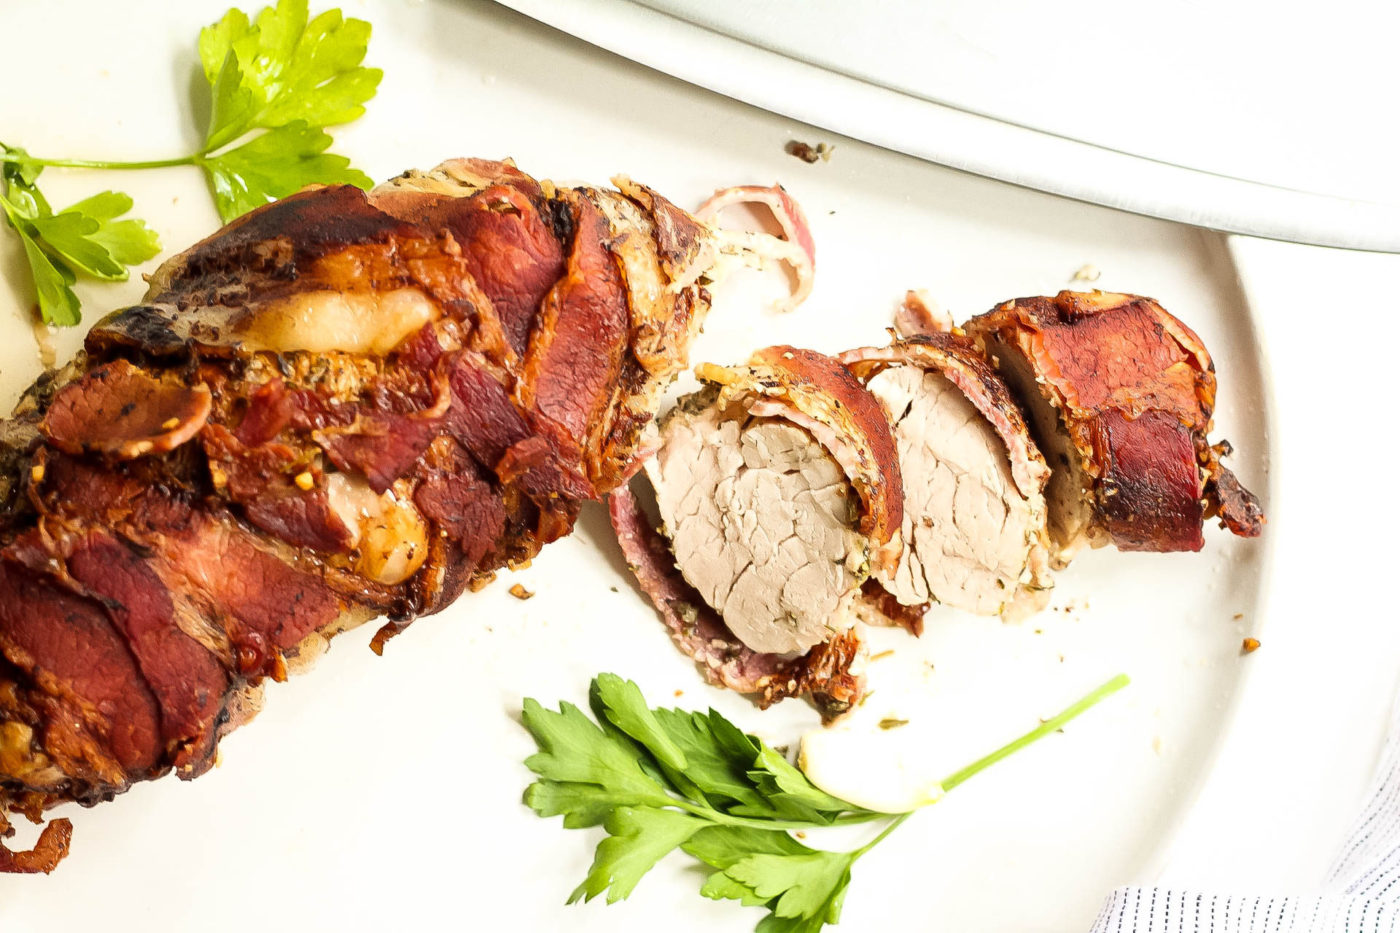 Get the recipe for Bailey’s Instant Pot Bacon Wrapped Pork Tenderloin on her blog!